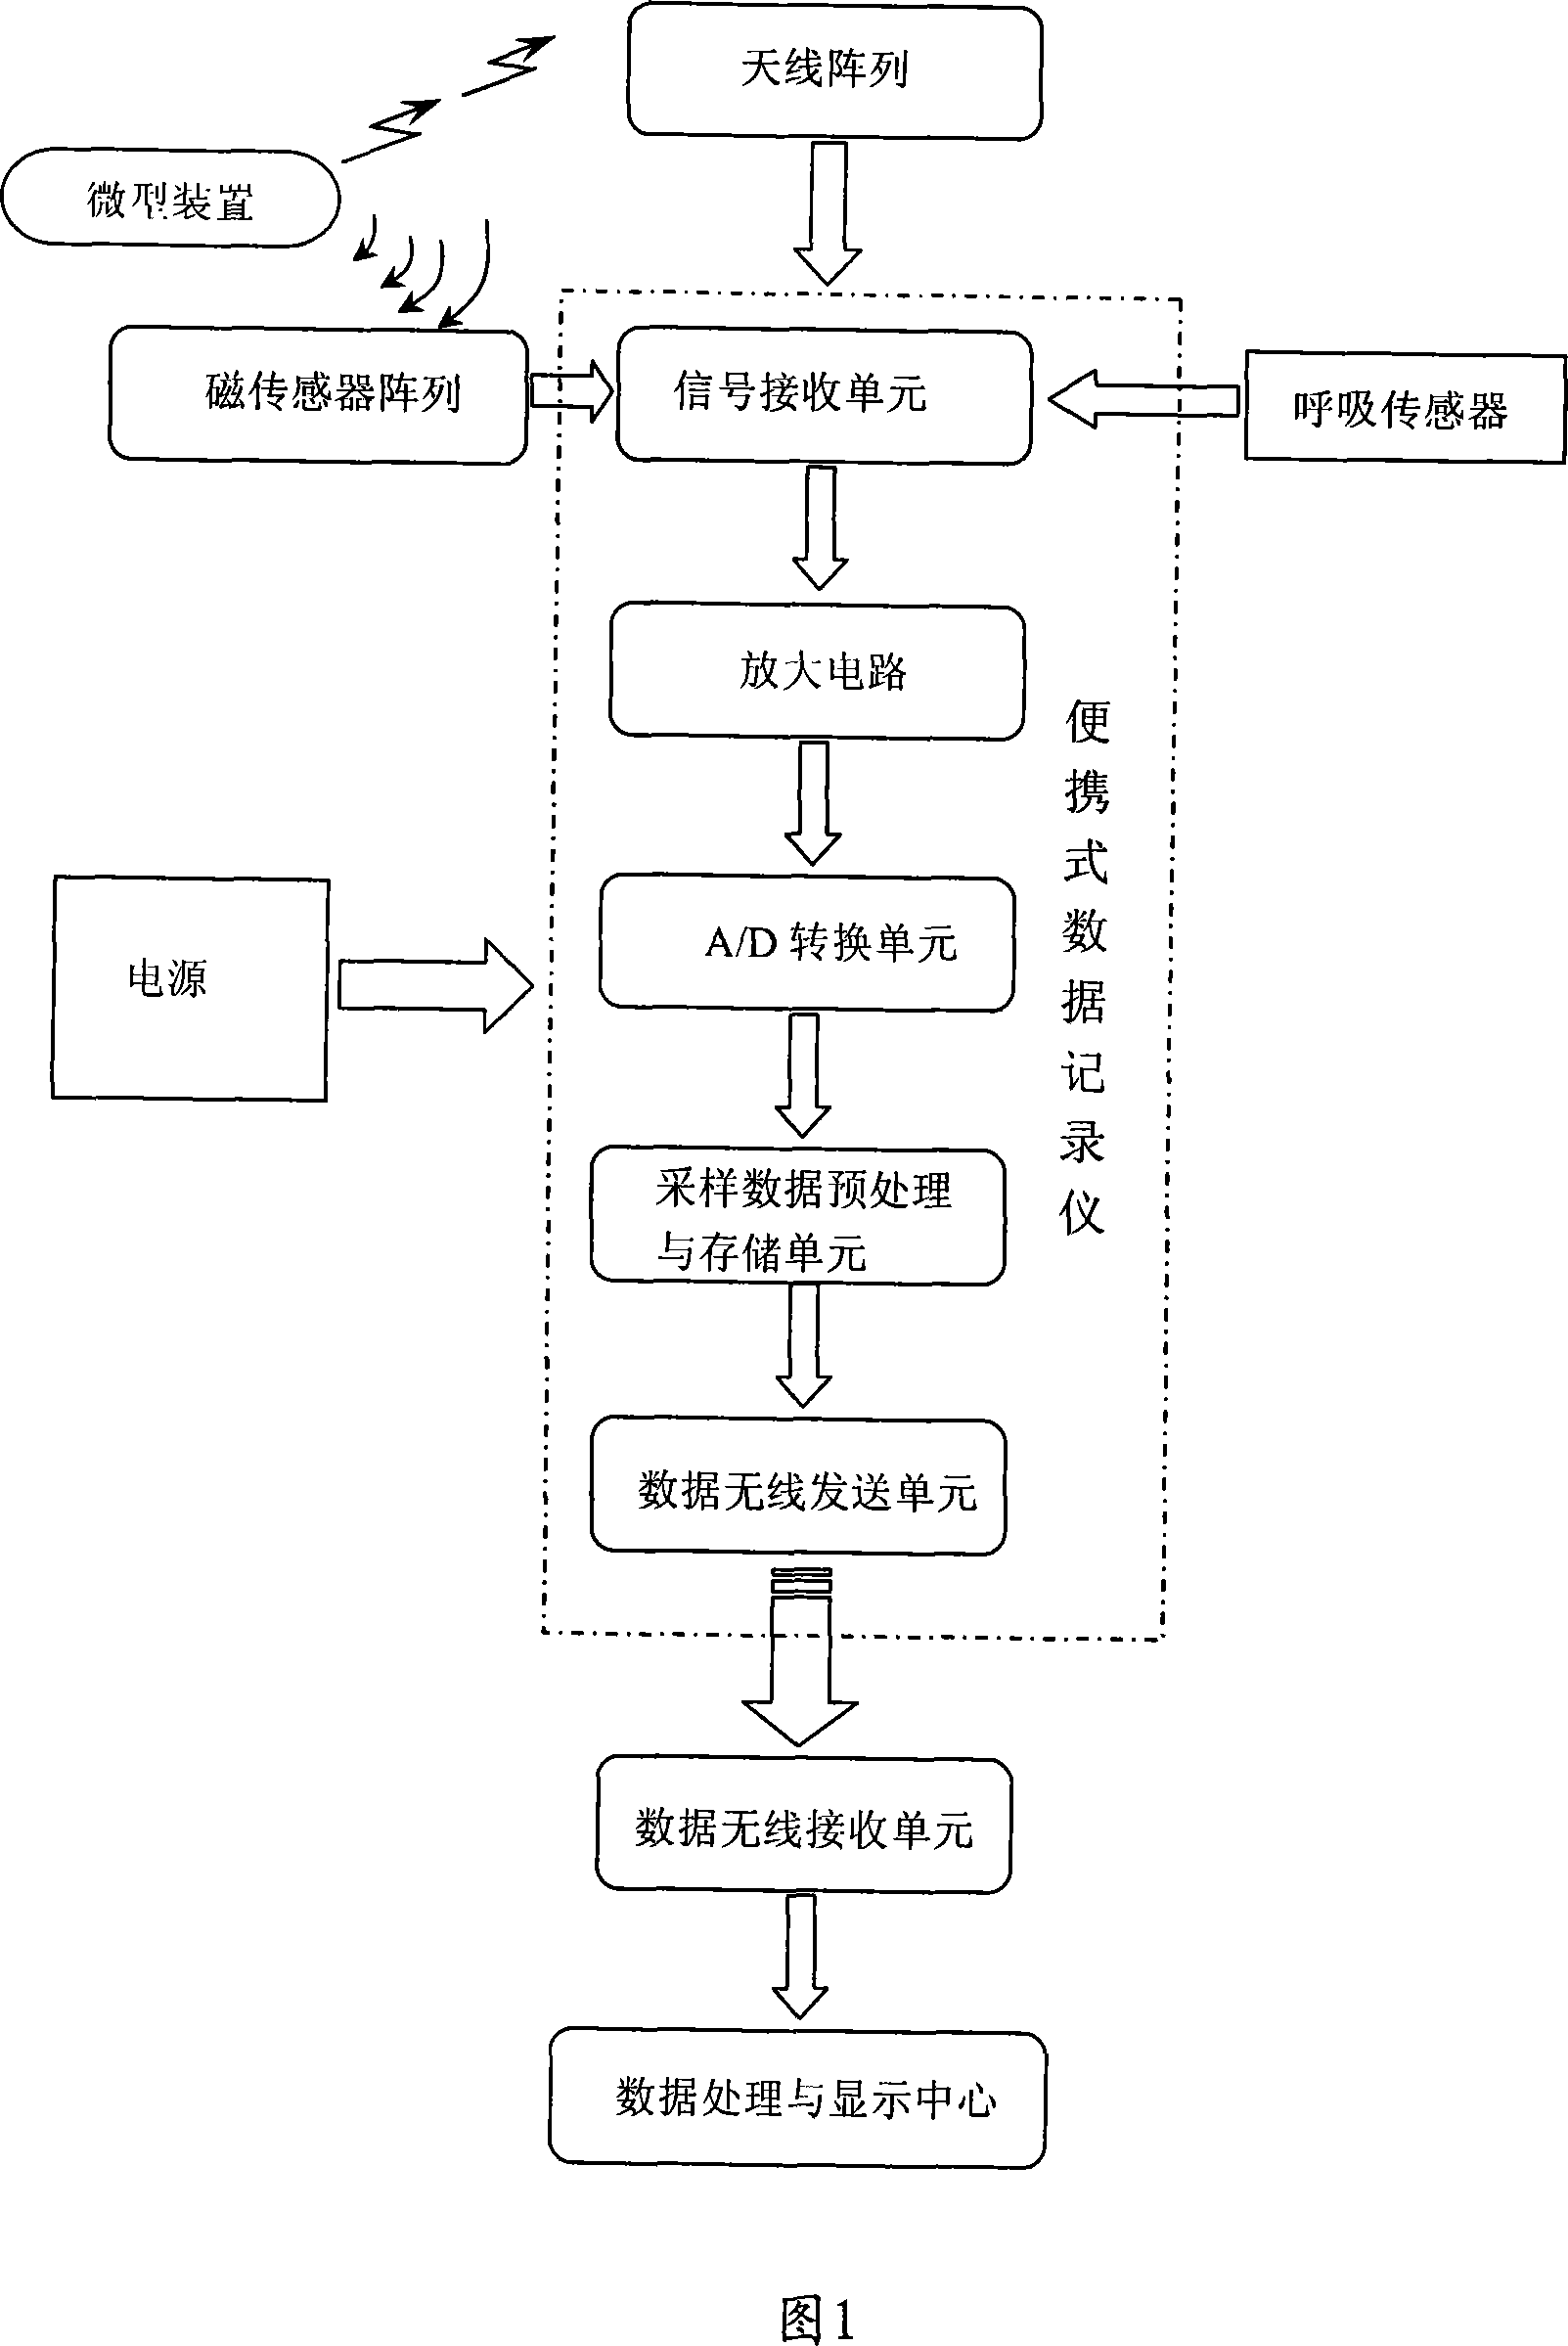 Method and system for tracking internal mini device